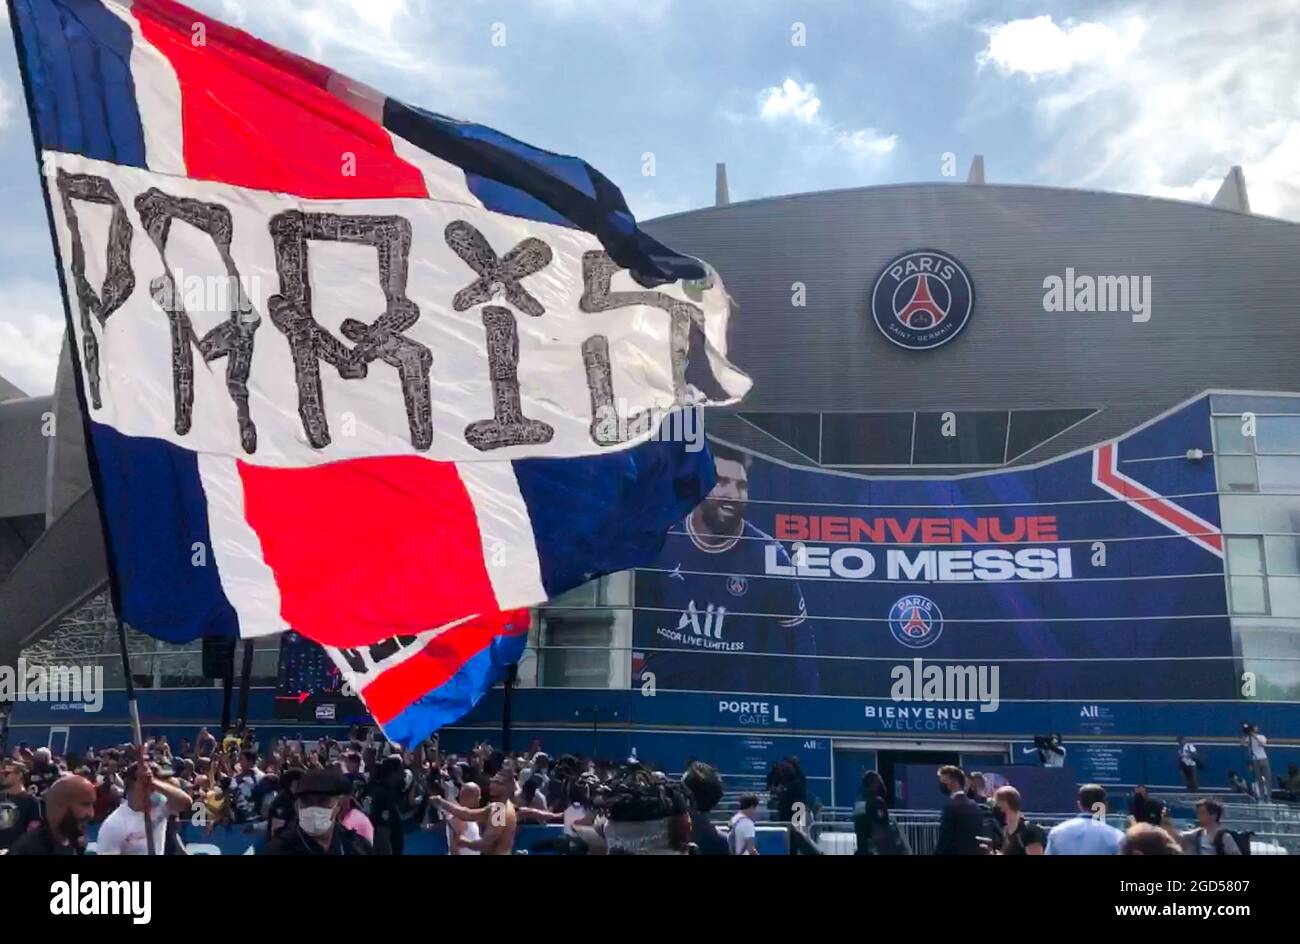 Paris, France. 11th Aug, 2021. Fans of Paris Saint-Germain F.C. greet new player Lionel Messi during his press conference at Parc des Princes Stadium. Argentinian player Leo Messi signed a two-year contract with PSG with the option of extending for a further year. Credit: Dmitry Orlov/TASS/Alamy Live News Stock Photo